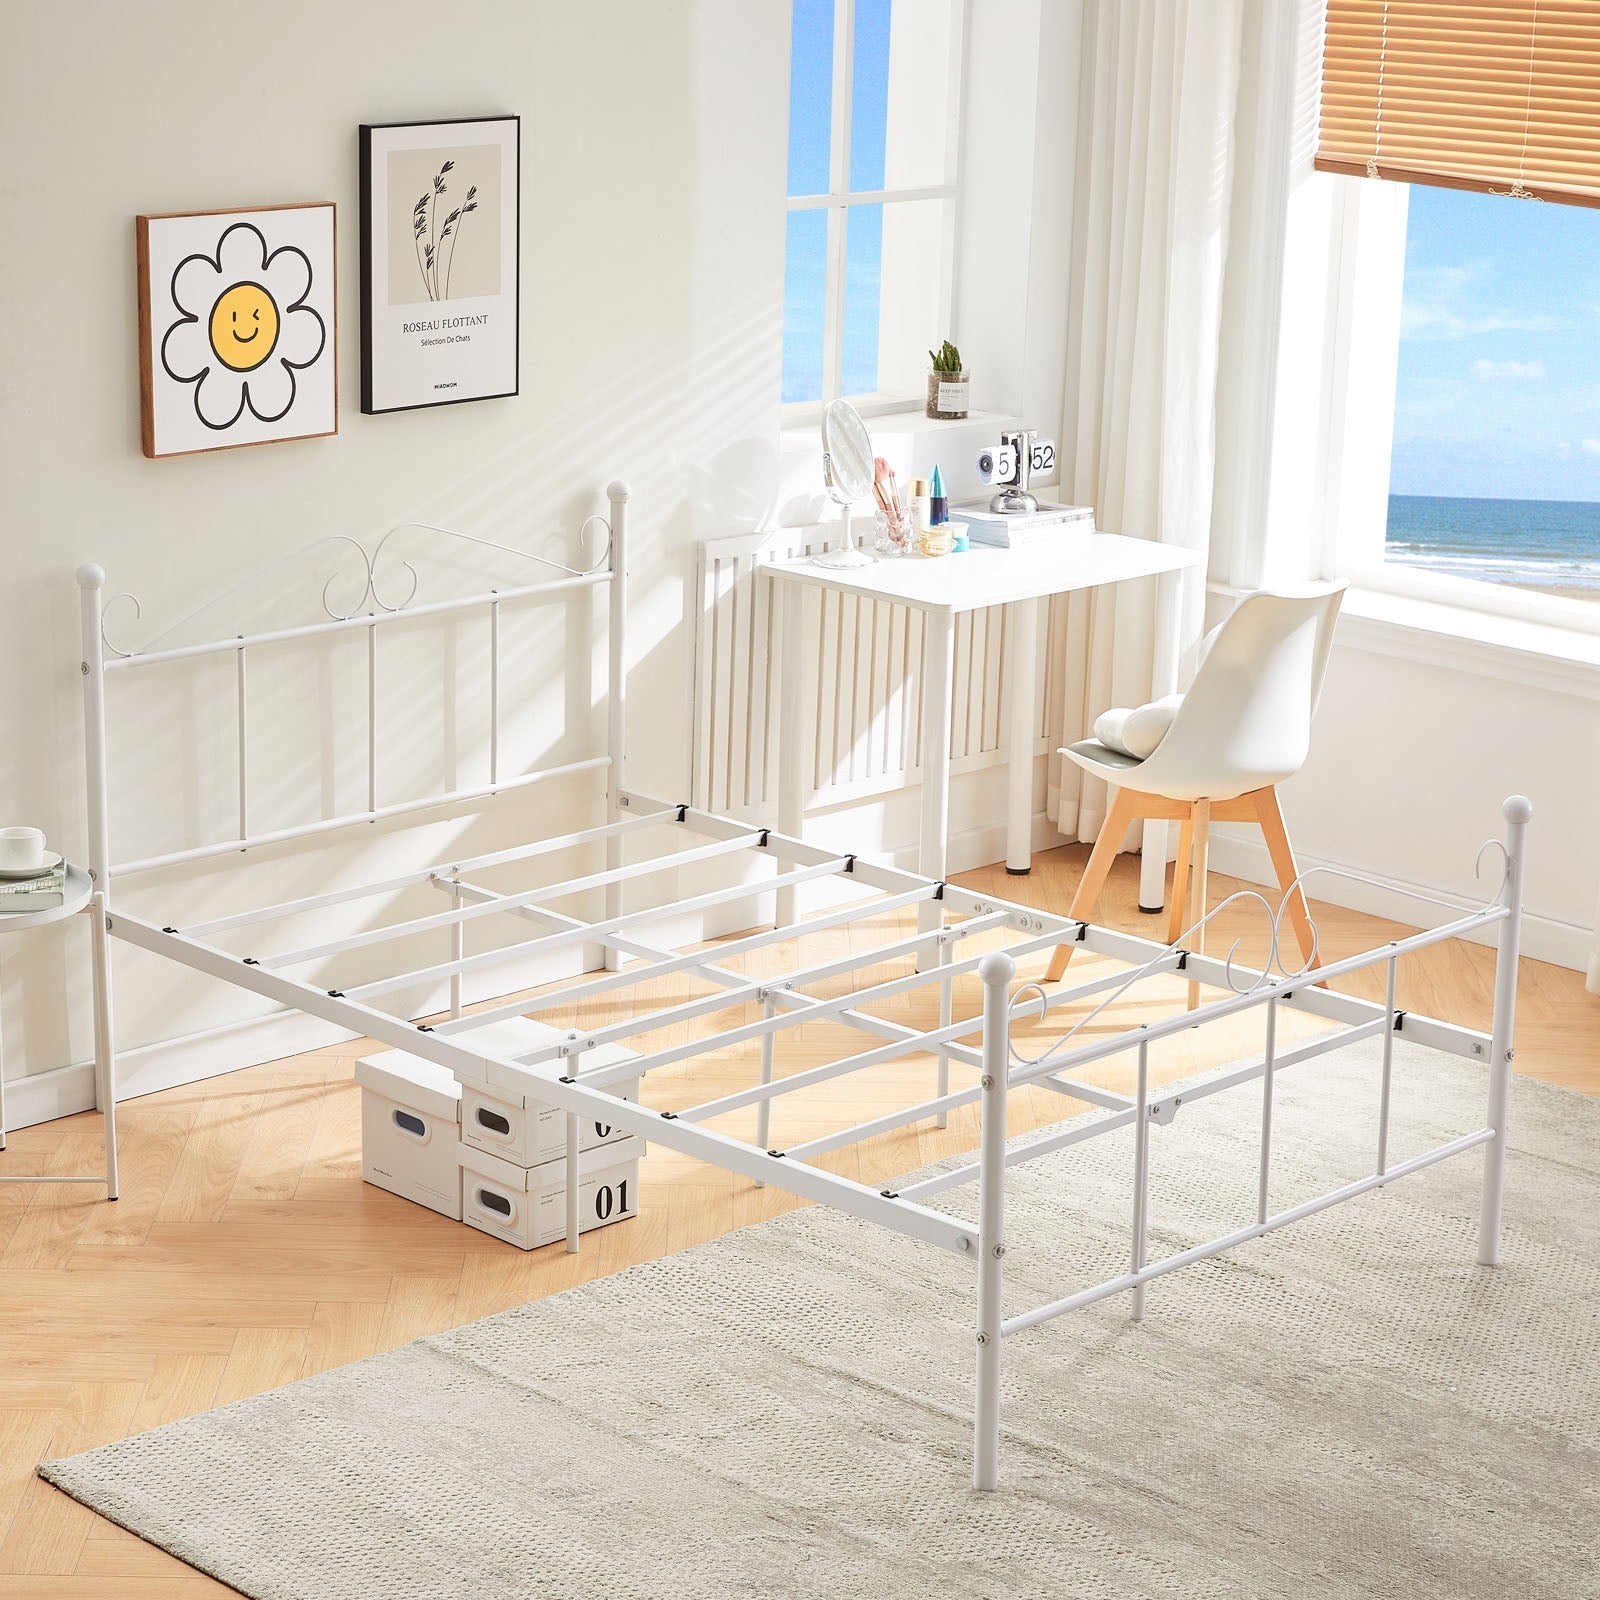 TOAST Simple/Double Metal Bed Frame 100 * 200 cm/120 * 200 cm - Black/White